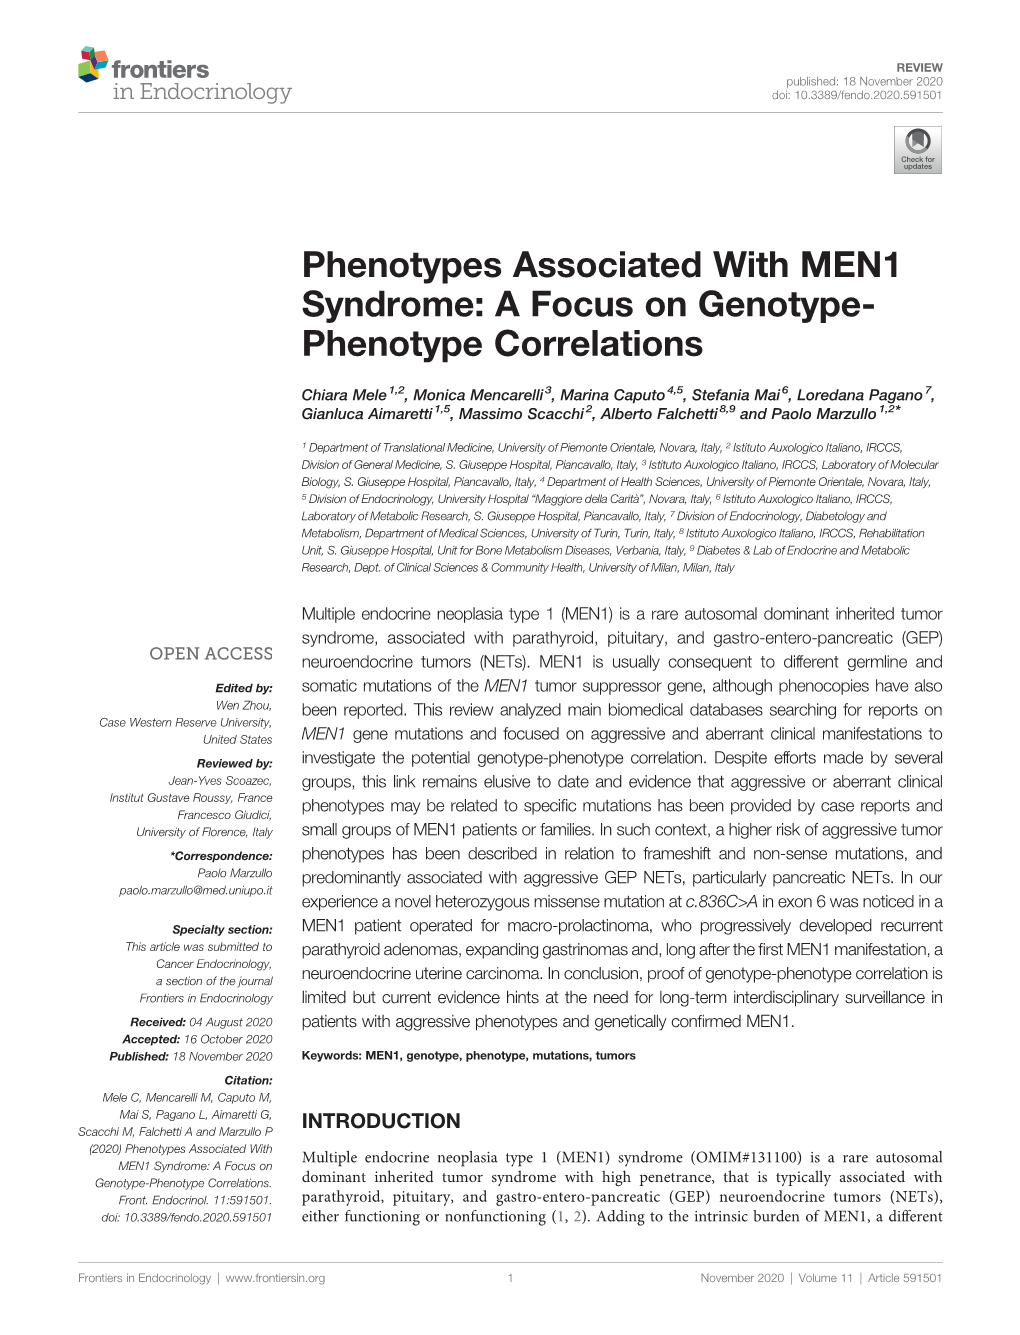 Phenotypes Associated with MEN1 Syndrome: a Focus on Genotype- Phenotype Correlations